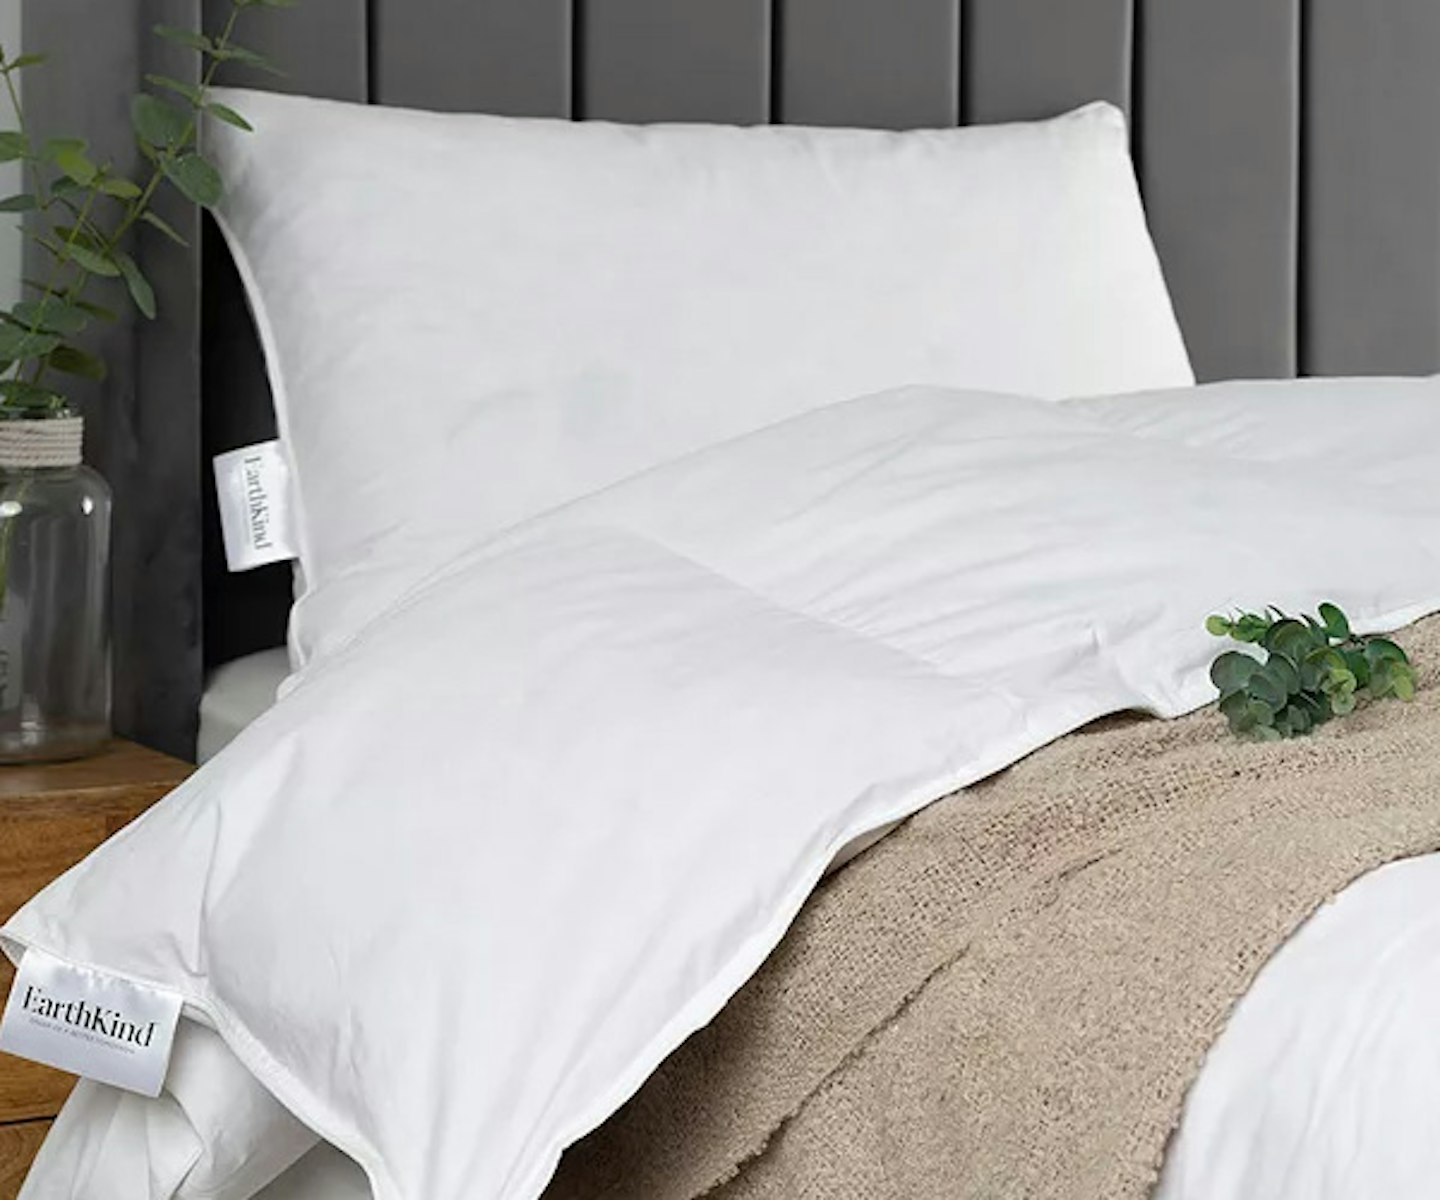 EarthKind™ Reclaimed Natural Down Duvet, 4.5 Tog, Double